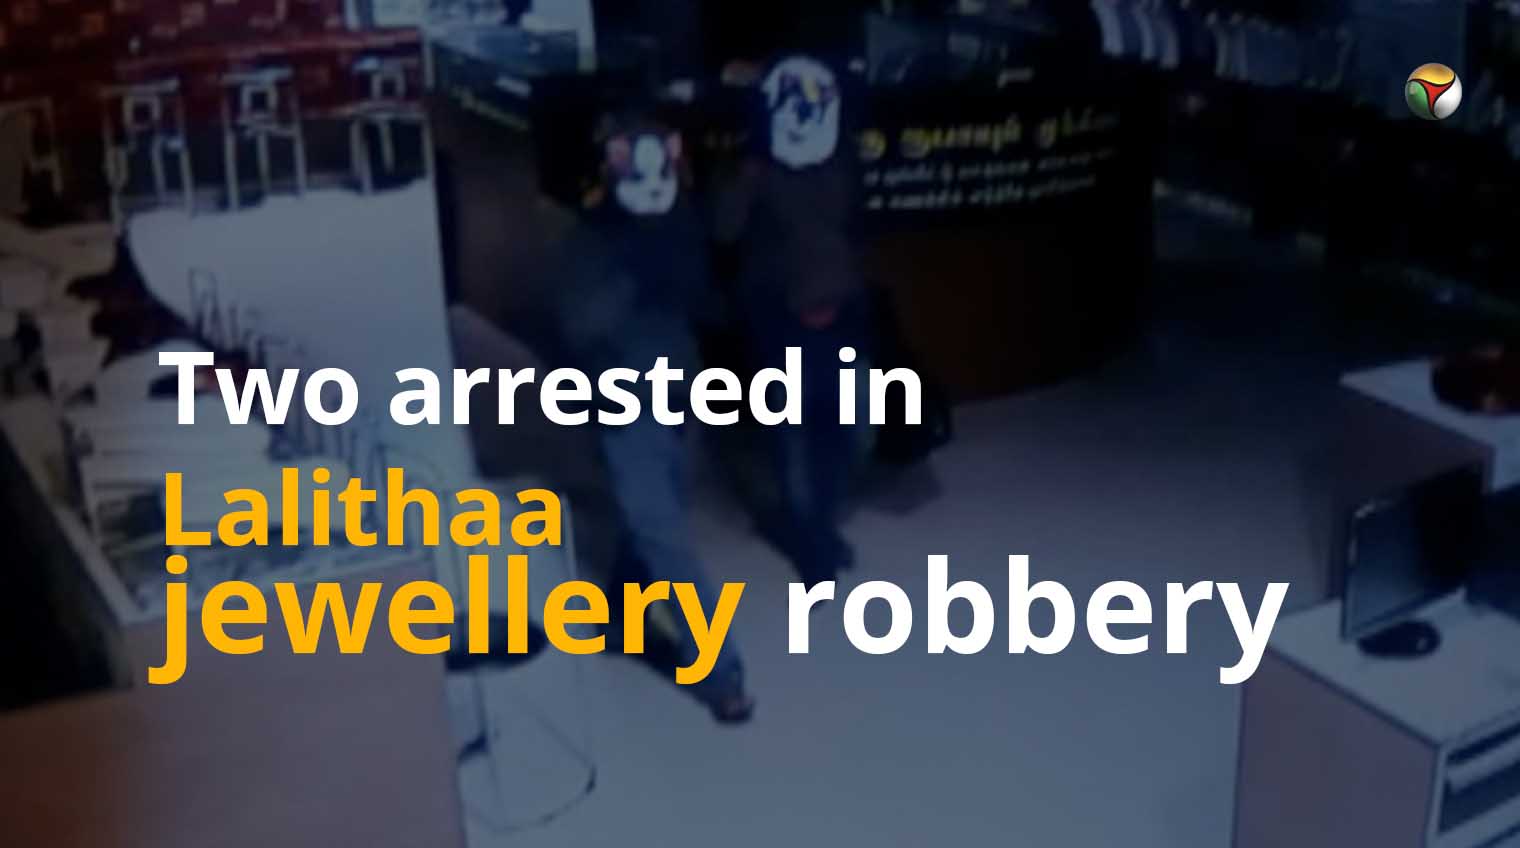 Two arrested in Lalithaa jewellery robbery